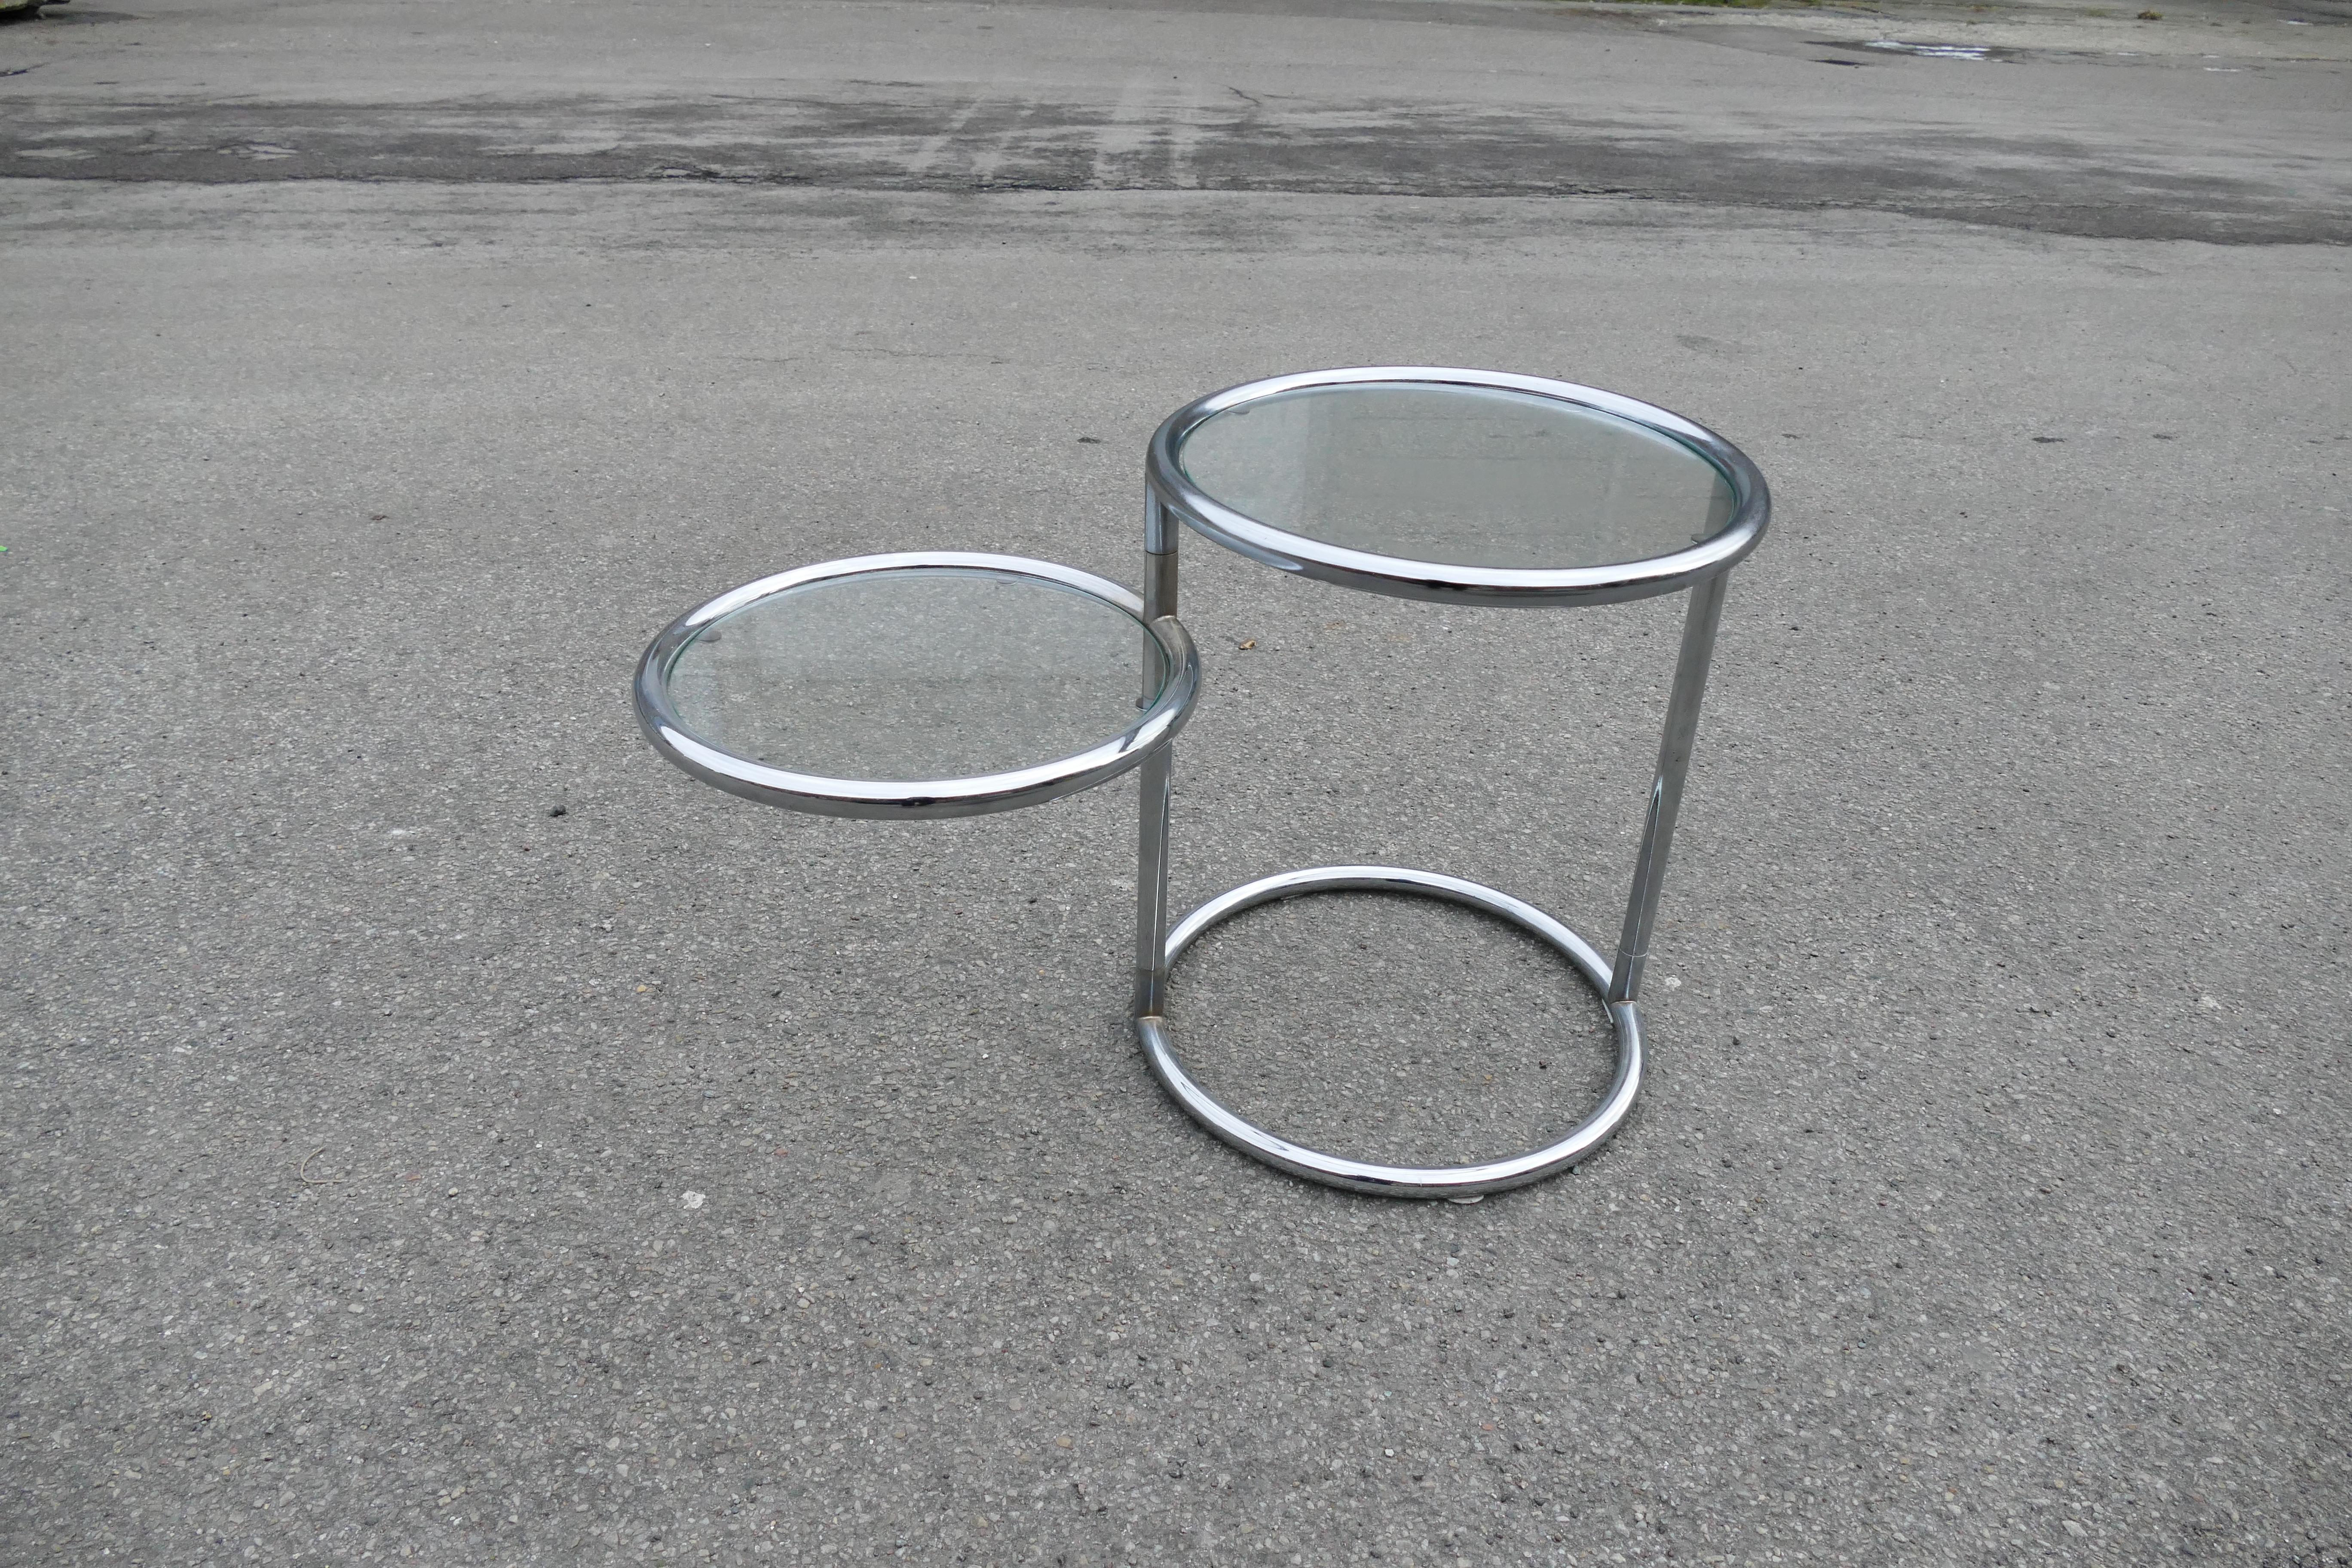 Vintage Art Deco double table from 1970s, Italy.